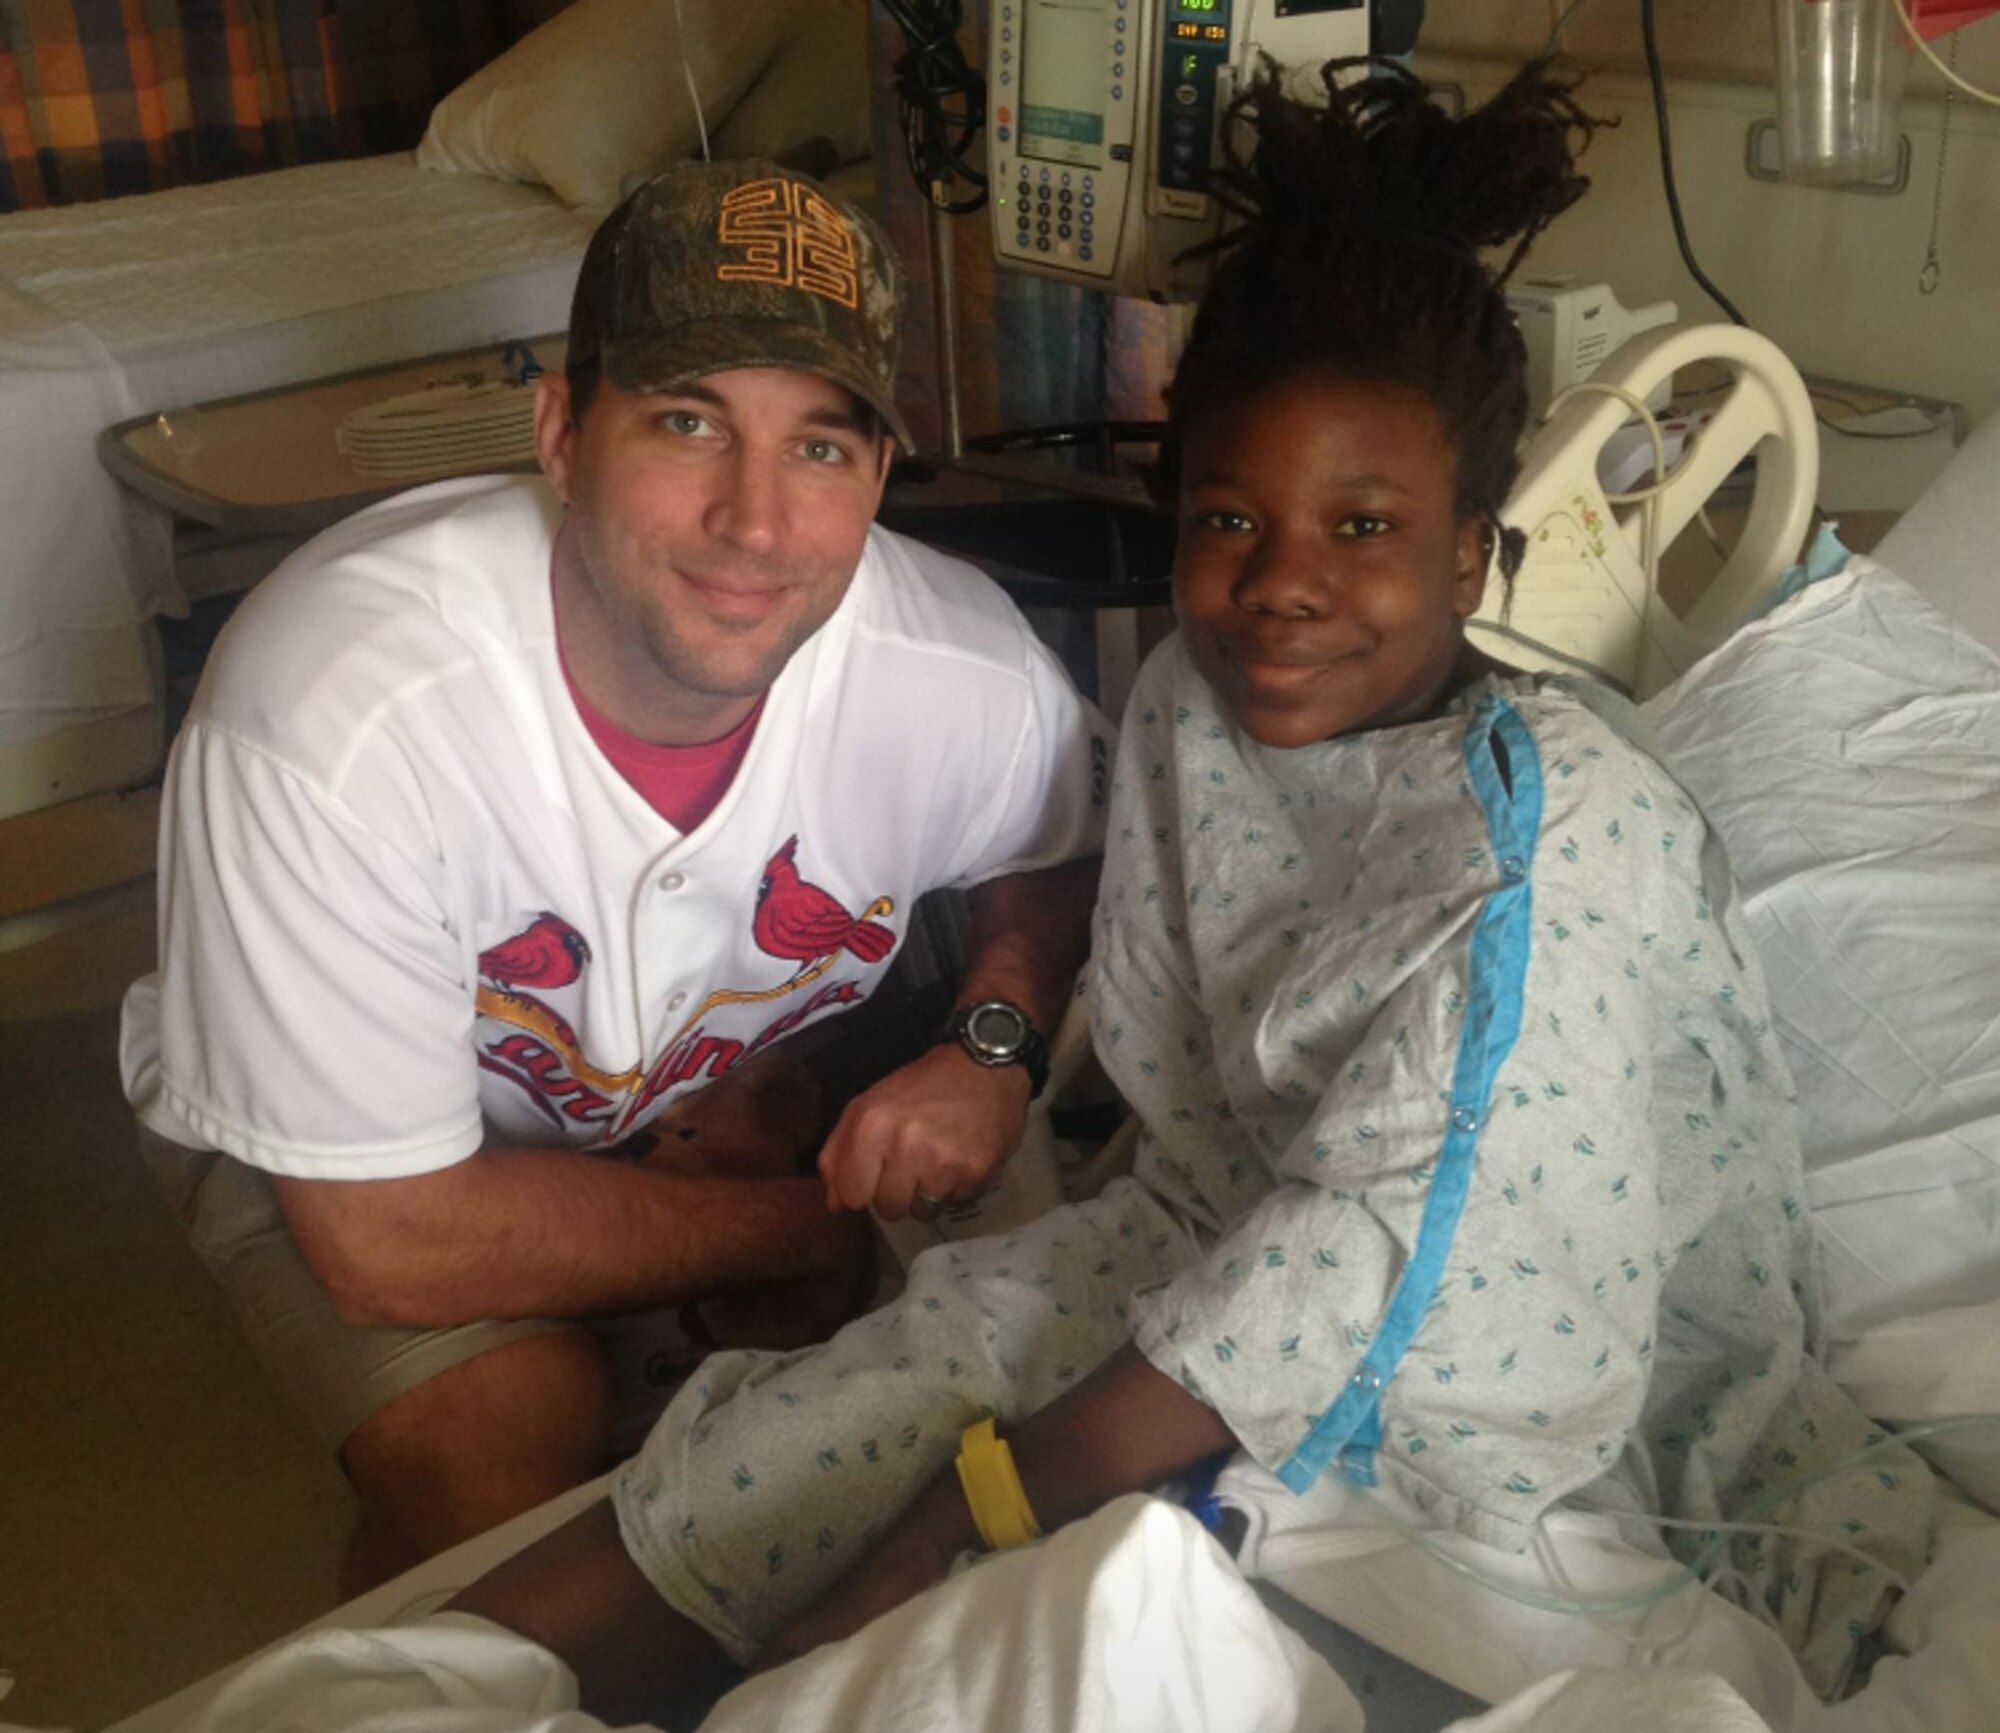 Adam Wainwright, St. Louis Cardinals’ starting pitcher, visits Iyana during a hospital stay in relation to her Sickle Cell Disease.  (Photo courtesy)